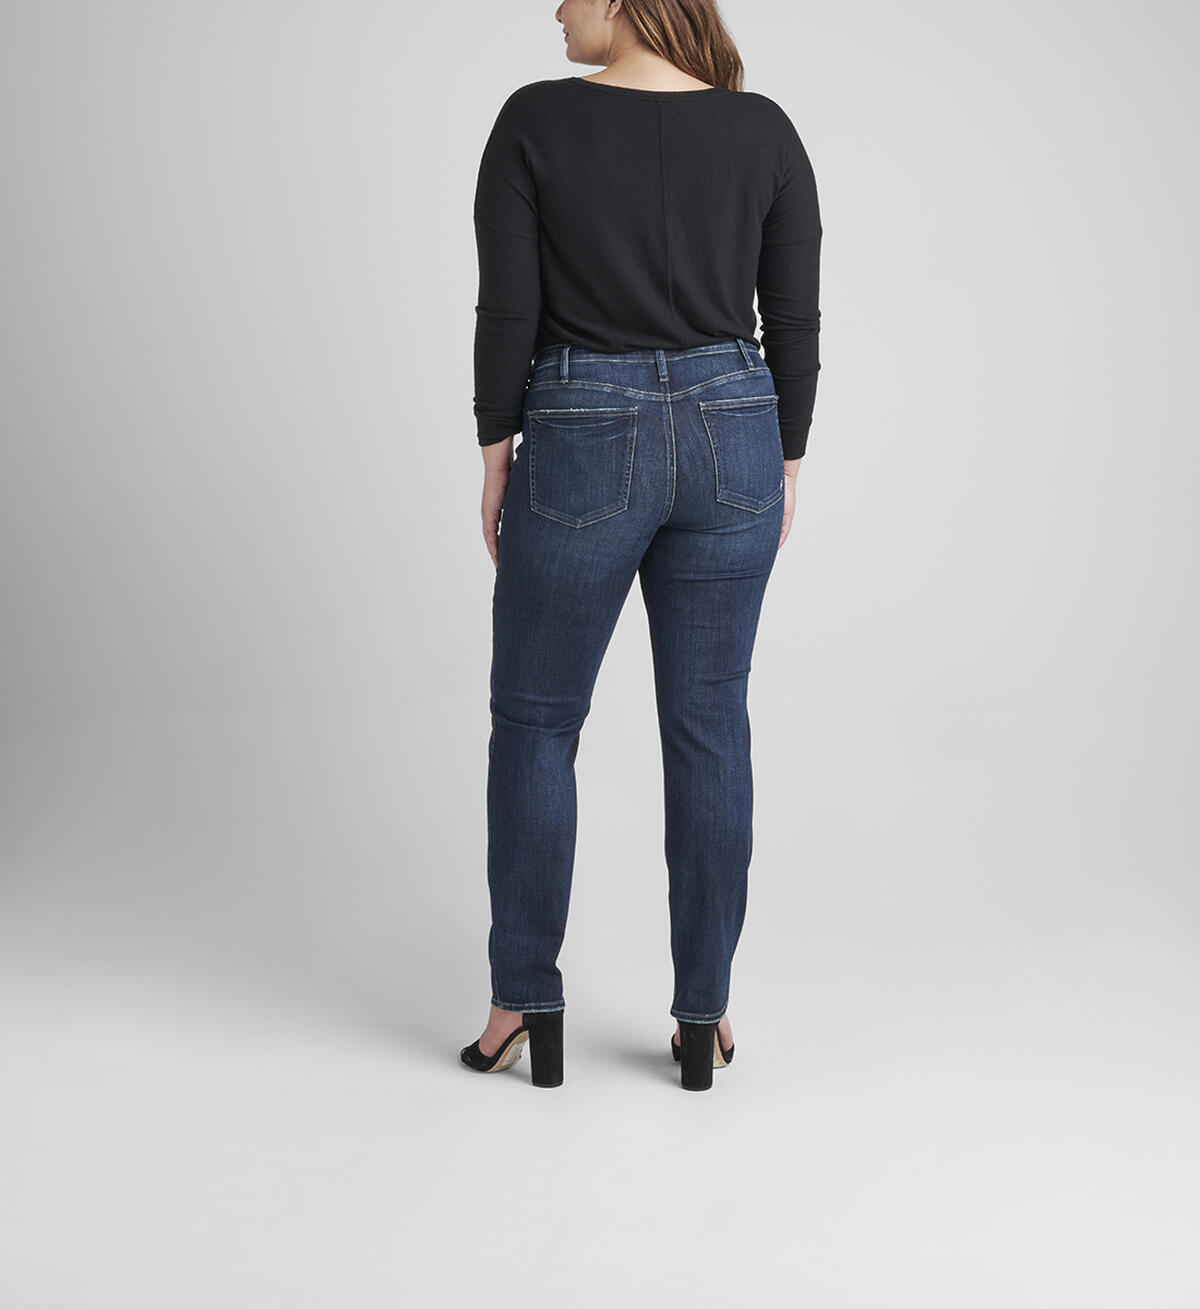 Most Wanted Mid Rise Straight Leg Jeans Plus Size, , hi-res image number 1